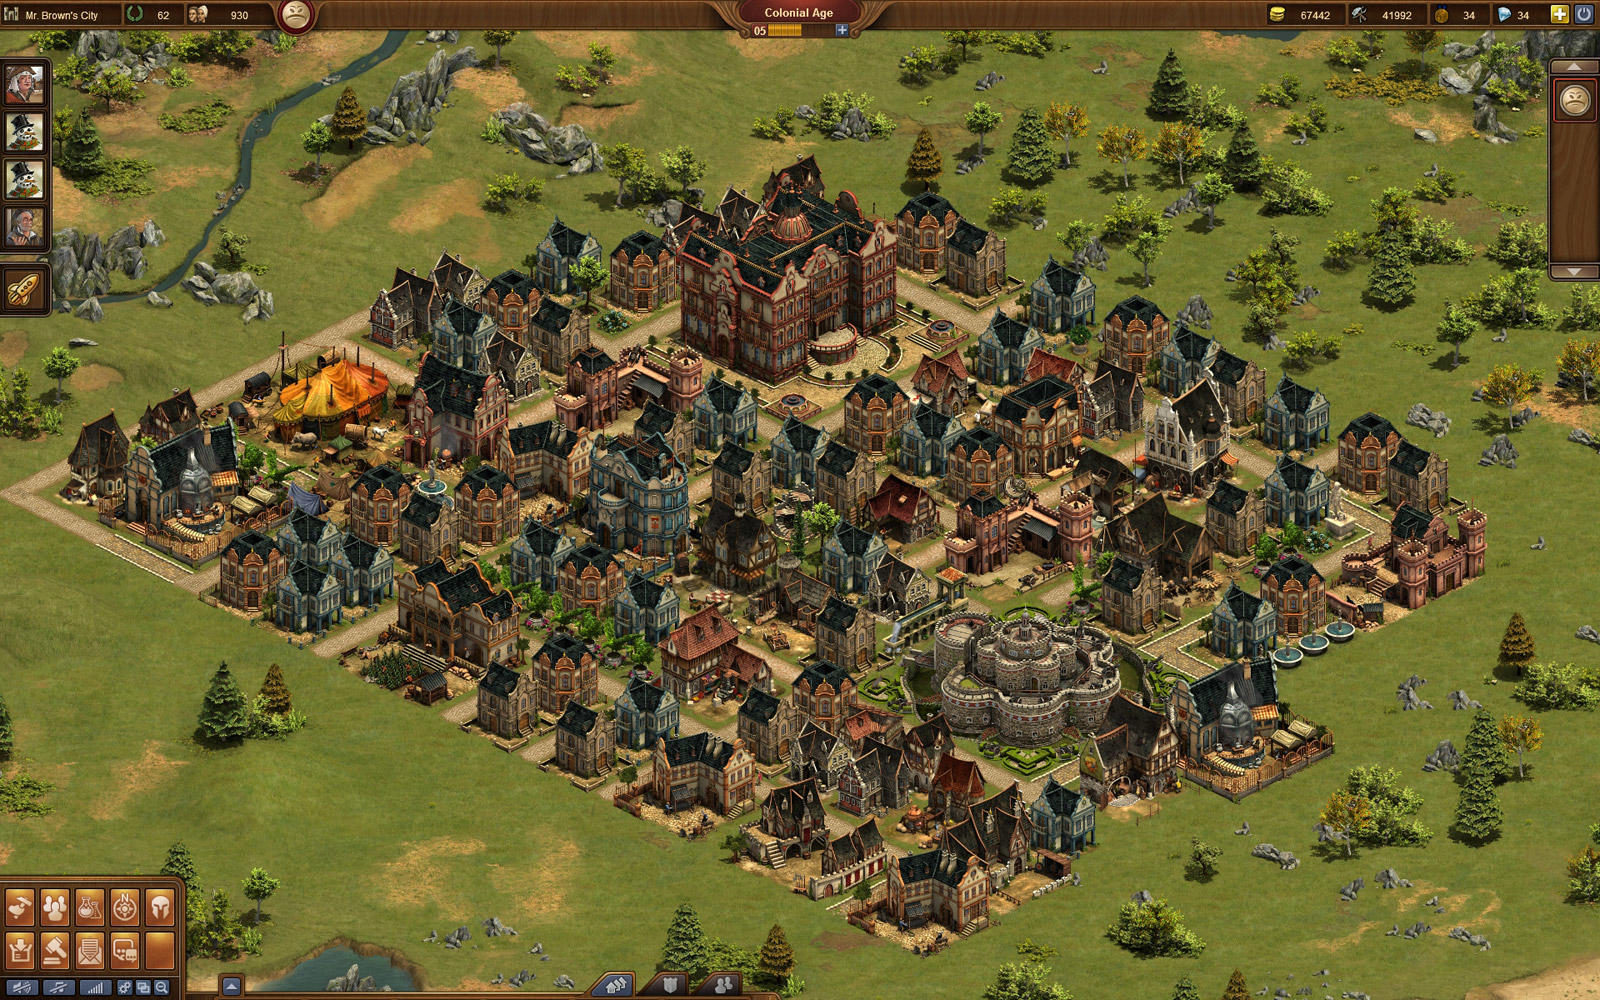 forge of empires halloween 2019